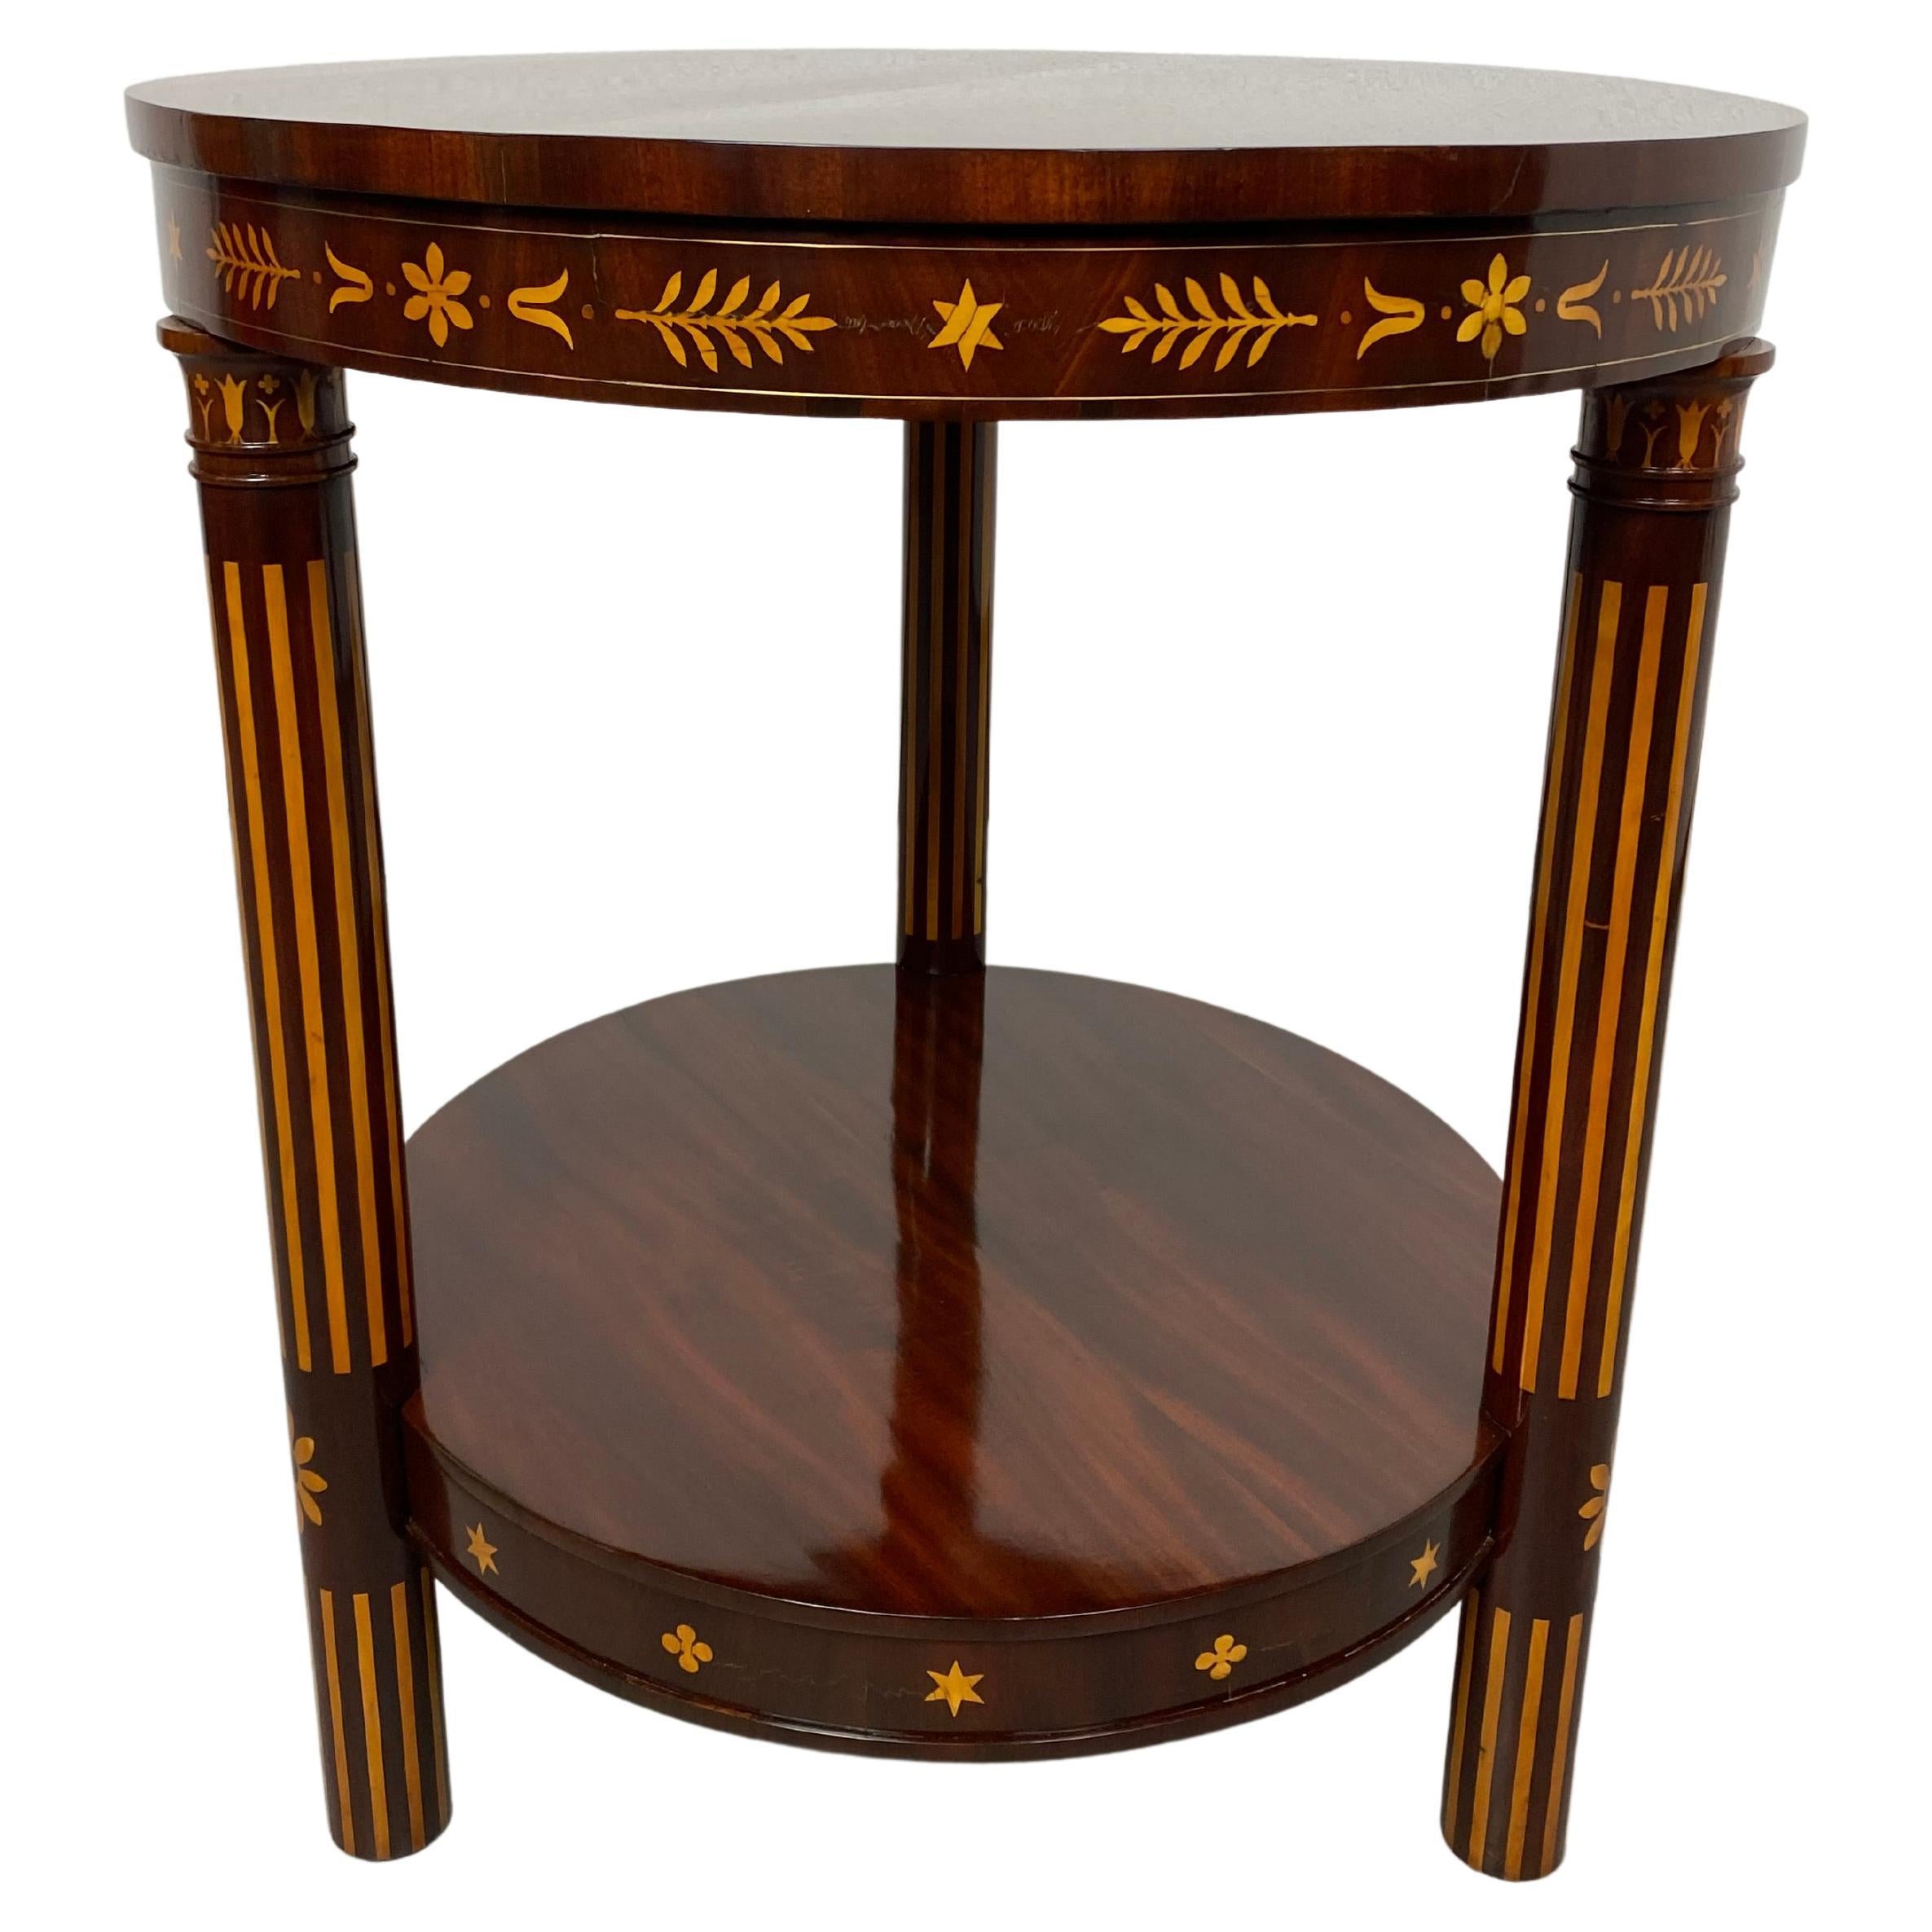 Inlaid empire side table circa 1800 For Sale